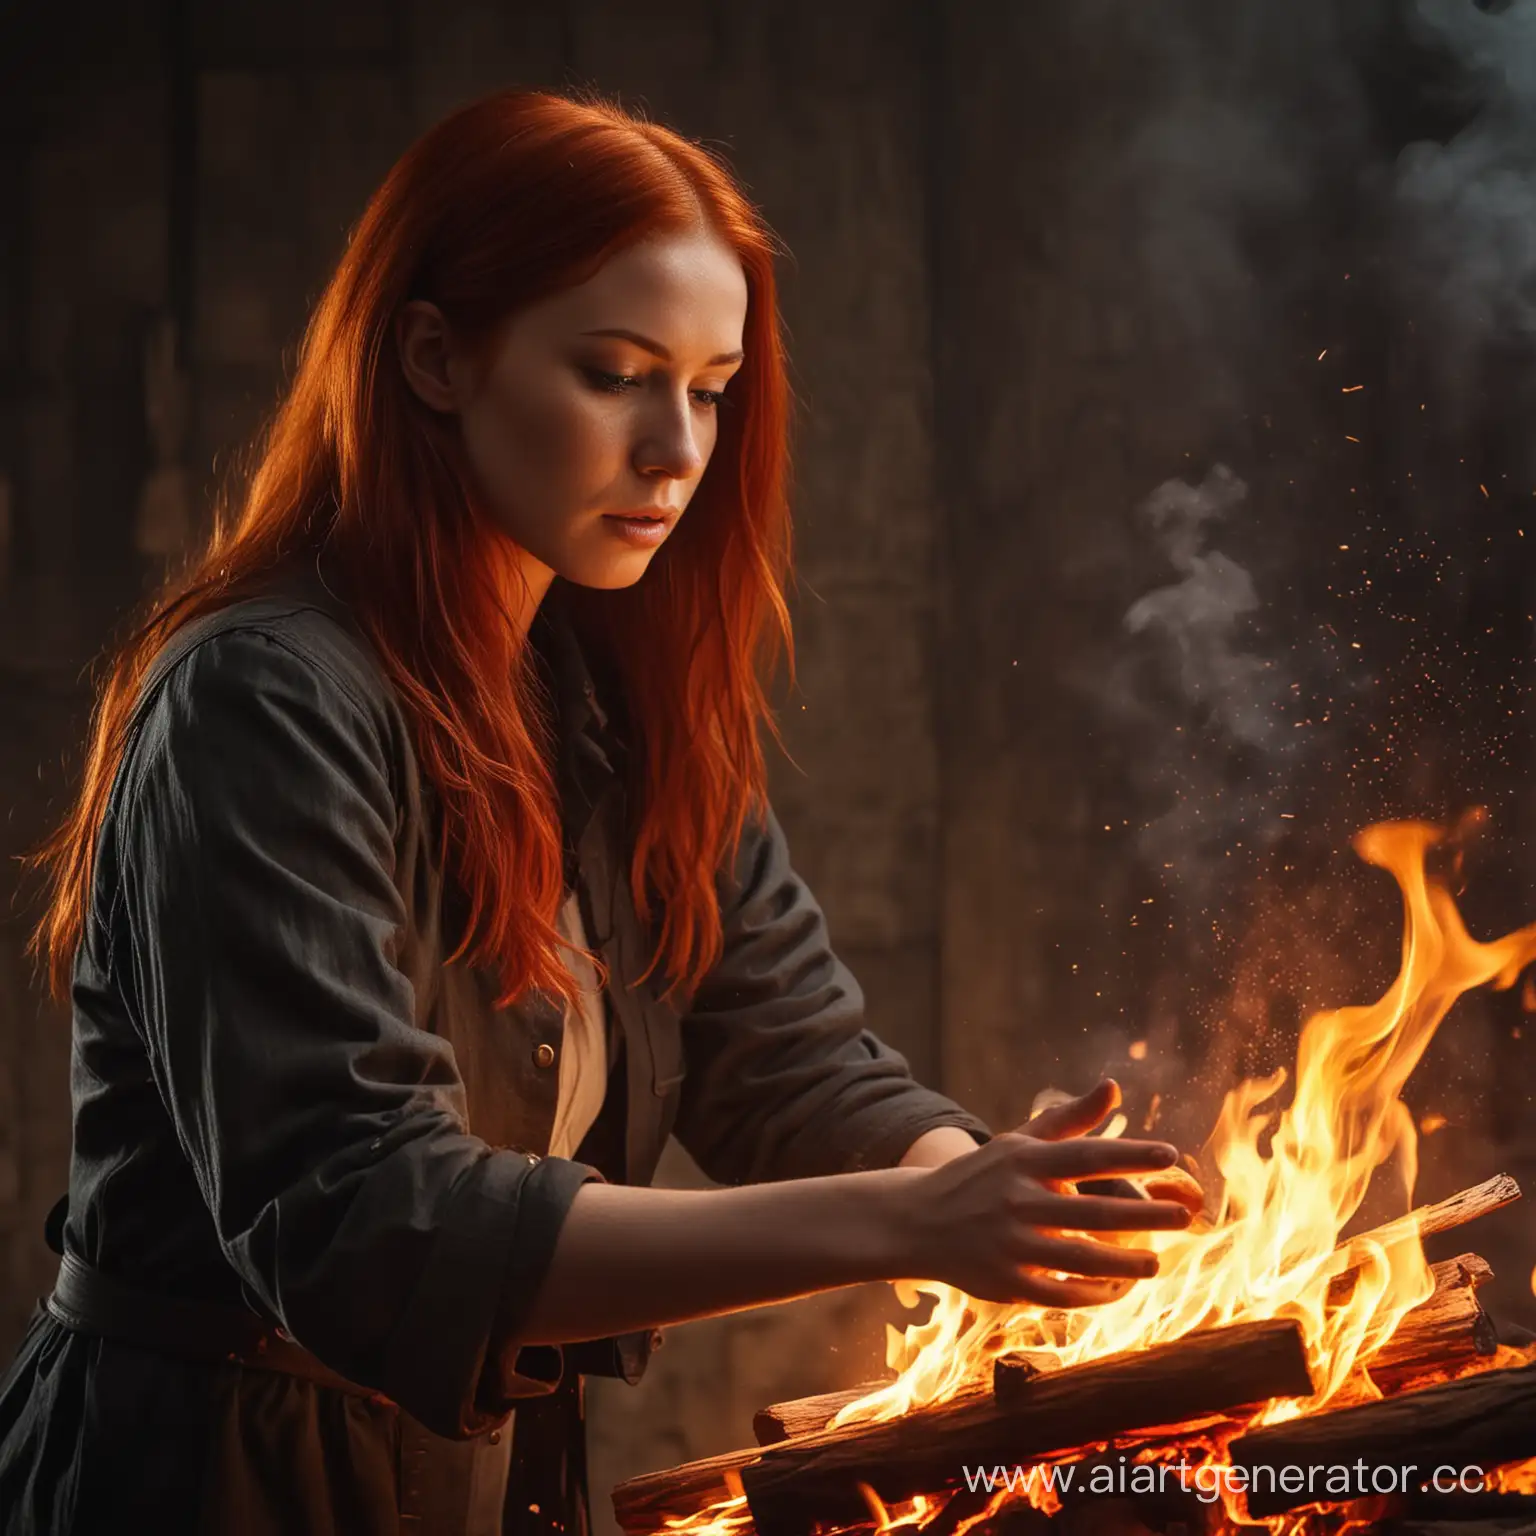 RedHaired-Woman-Controlling-Fire-Powerful-Hands-in-High-Definition-with-Dramatic-Lighting